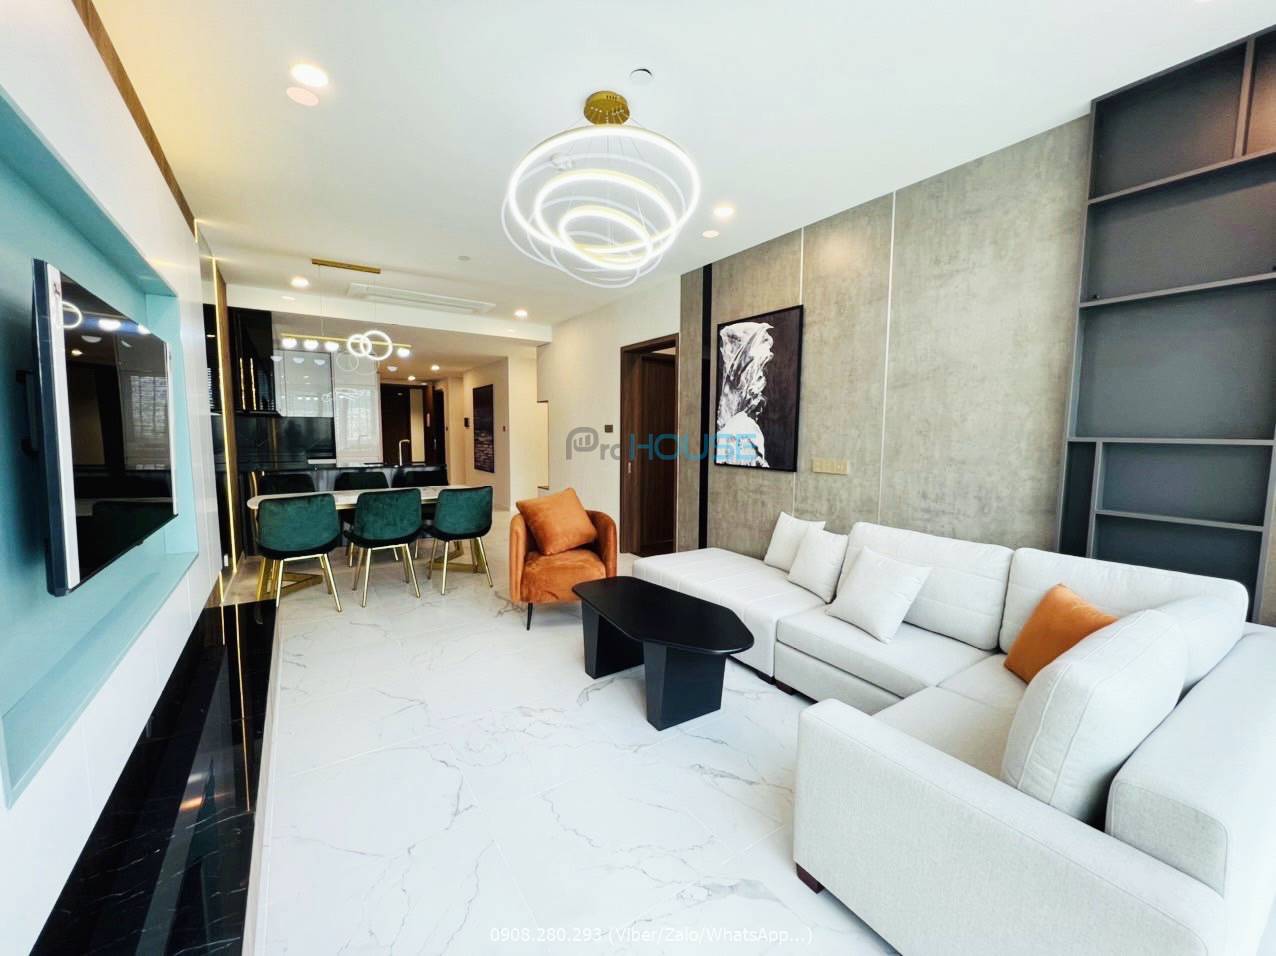 3 bedroom apartment for rent in The Galleria Residence only 1600 USD/month